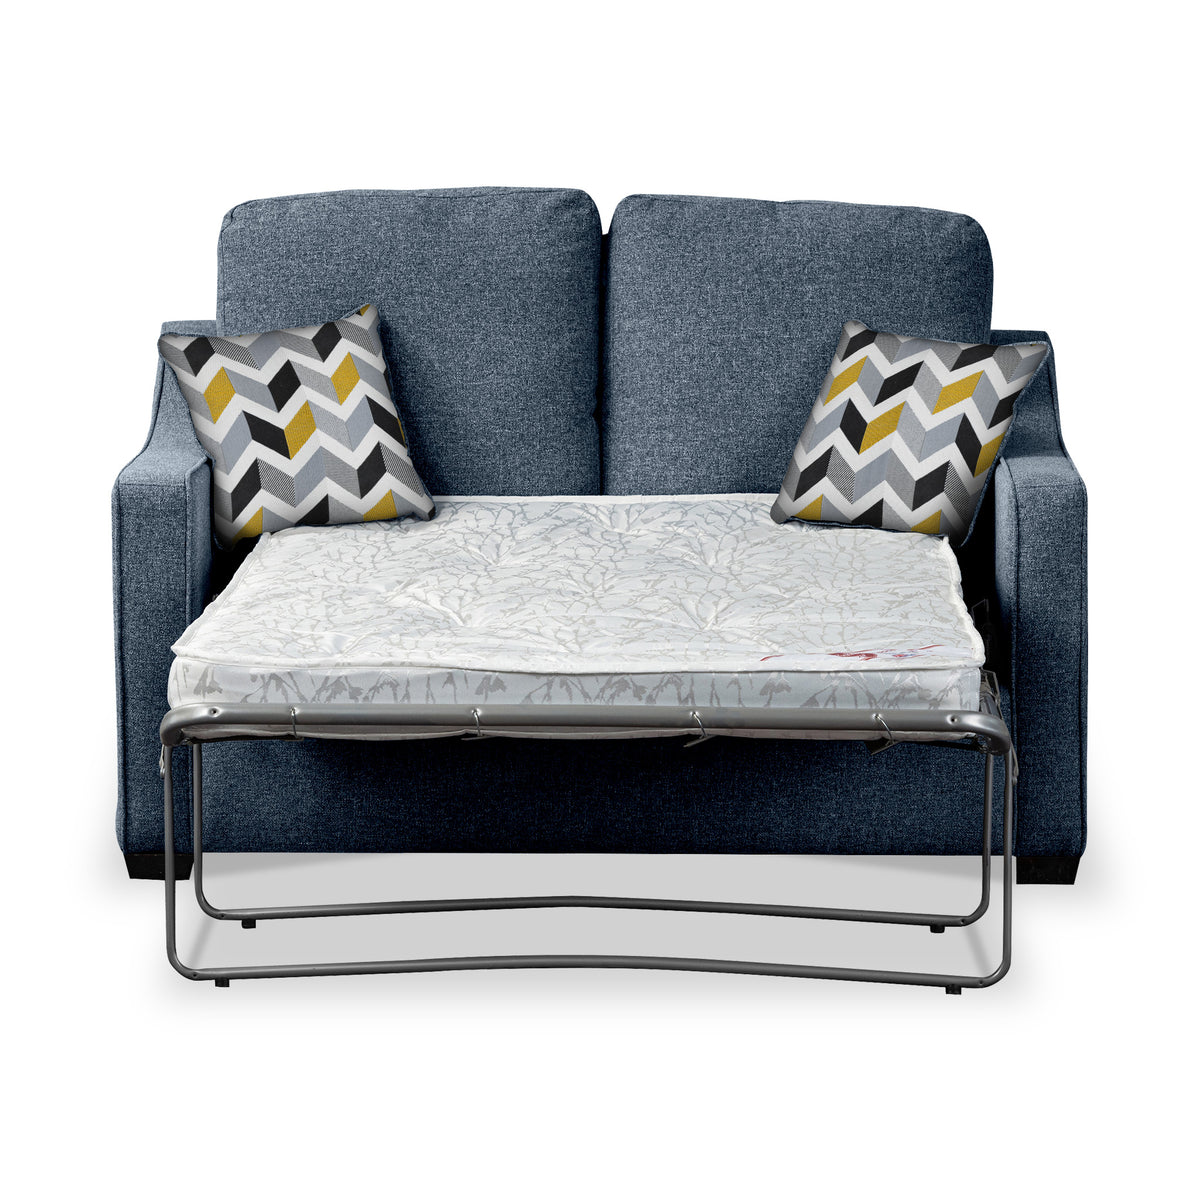 Fenton Midnight Soft Weave 2 Seater Sofabed with Mustard Scatter Cushions from Roseland Furniture